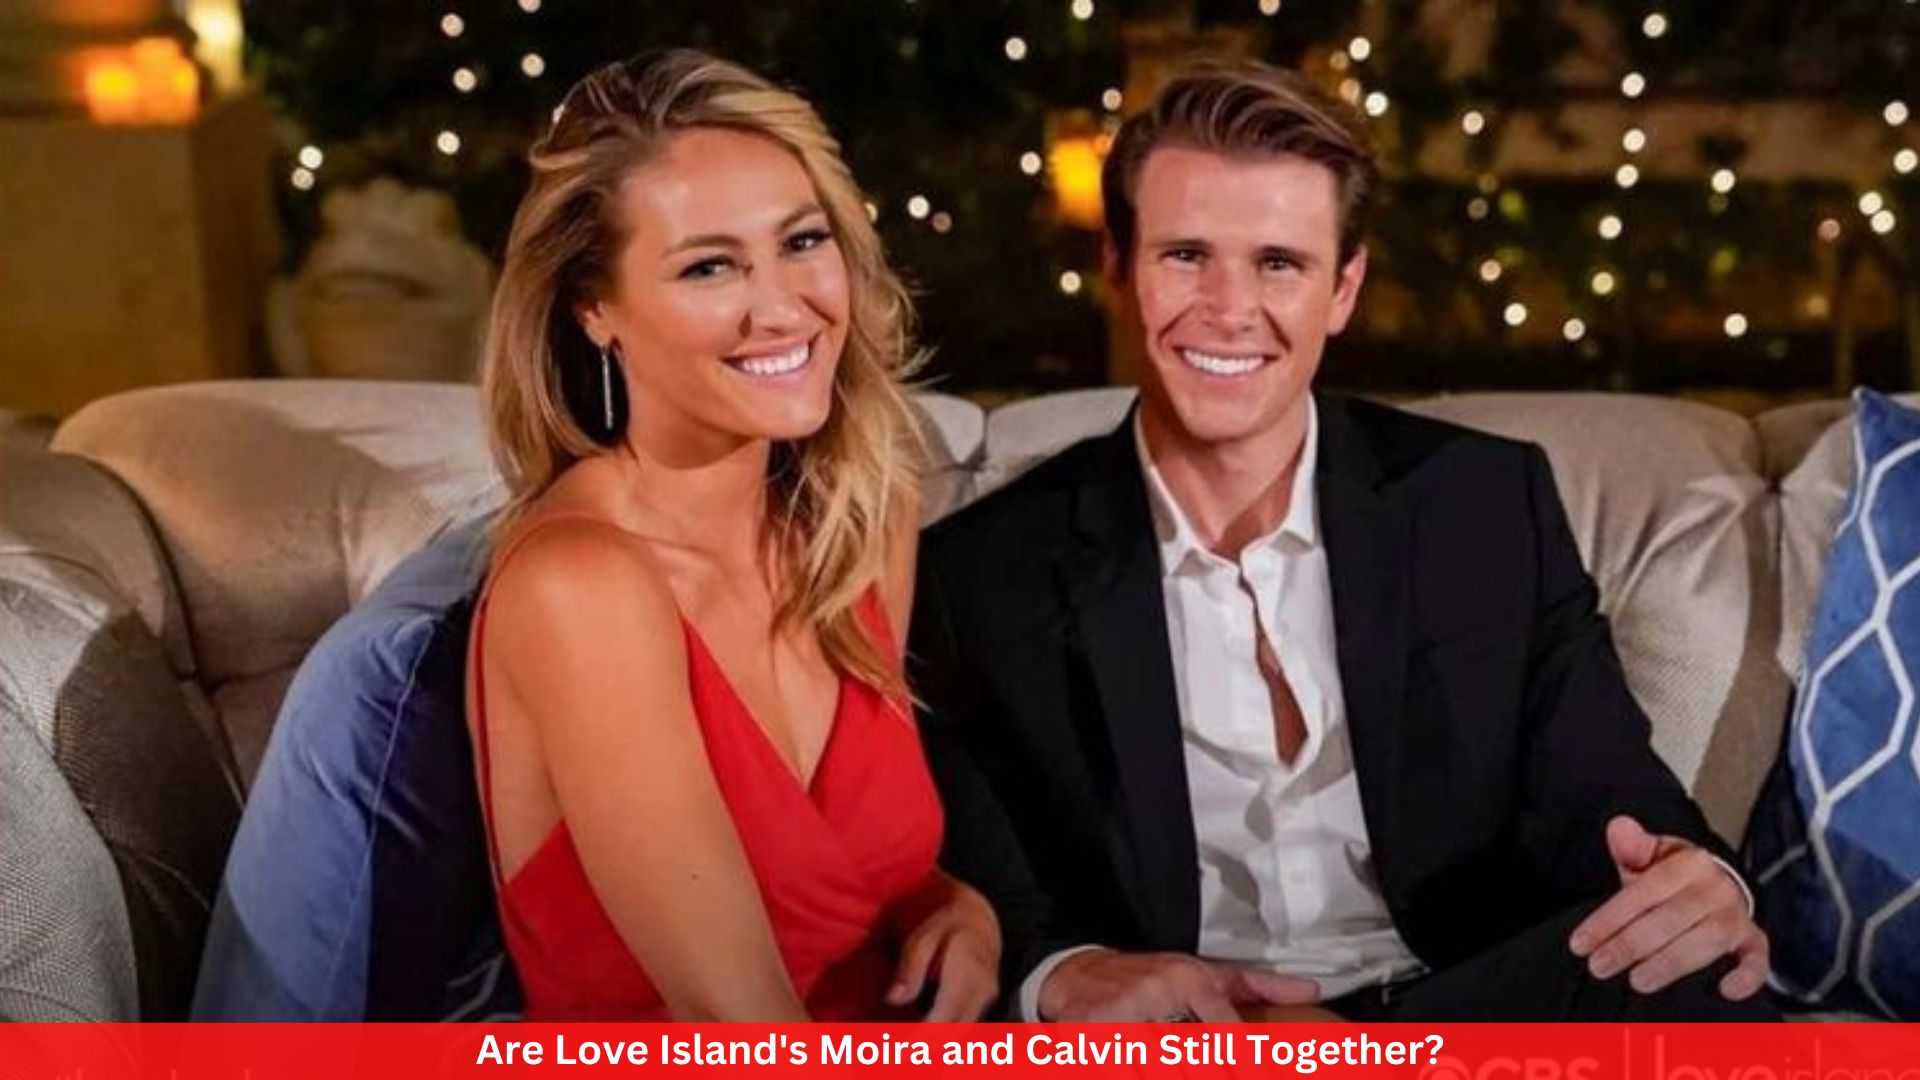 Are Love Island's Moira and Calvin Still Together?